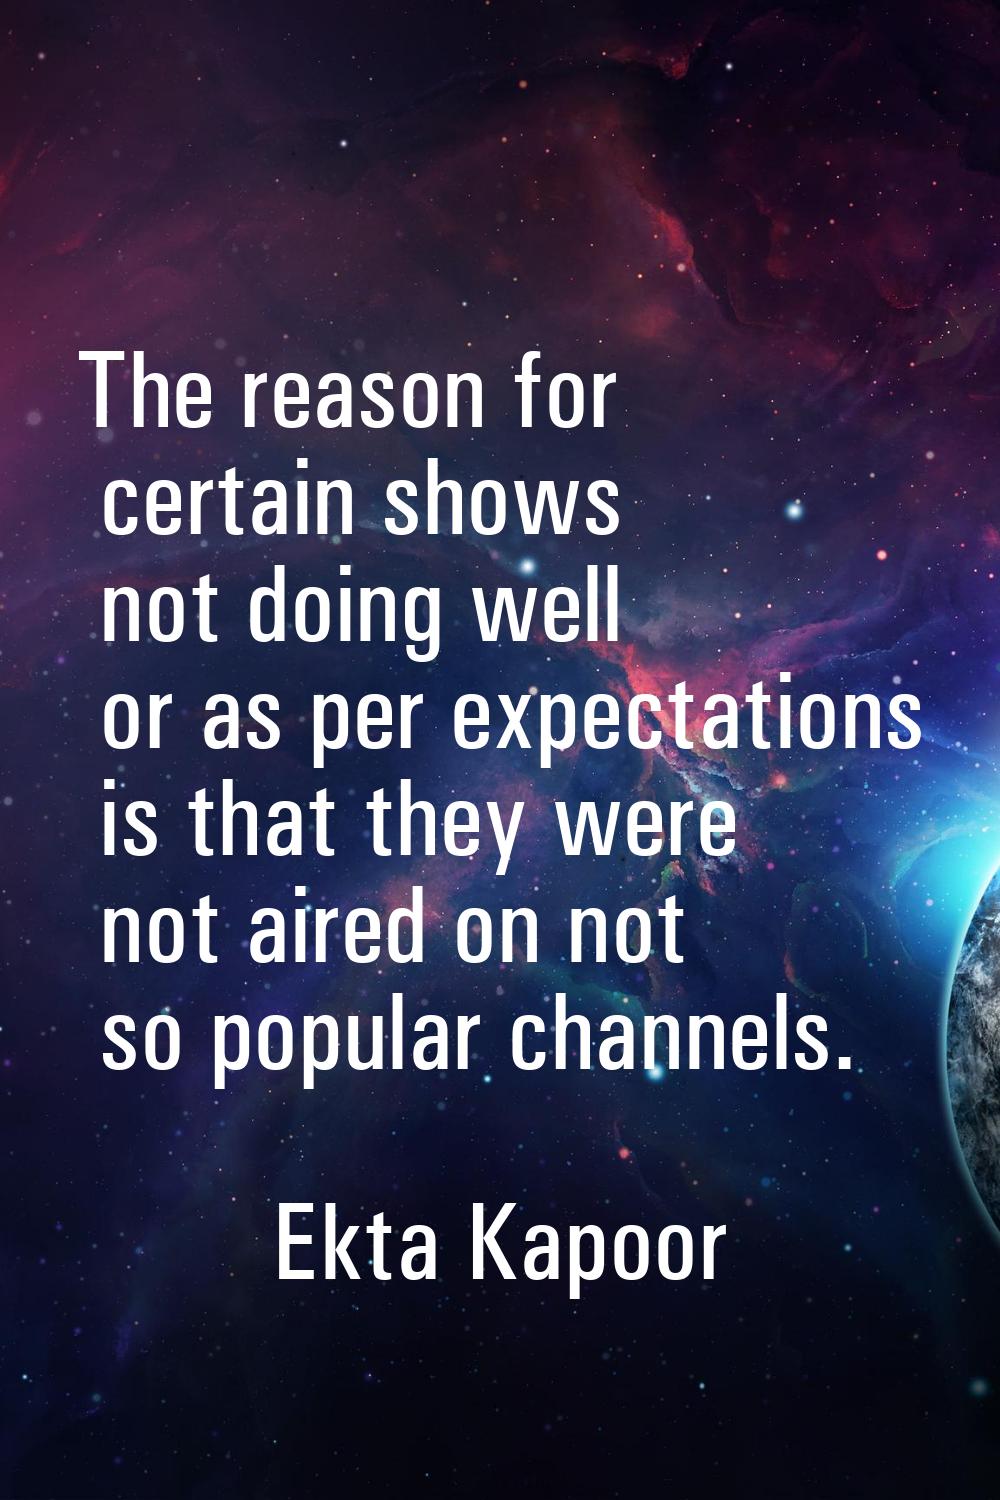 The reason for certain shows not doing well or as per expectations is that they were not aired on n